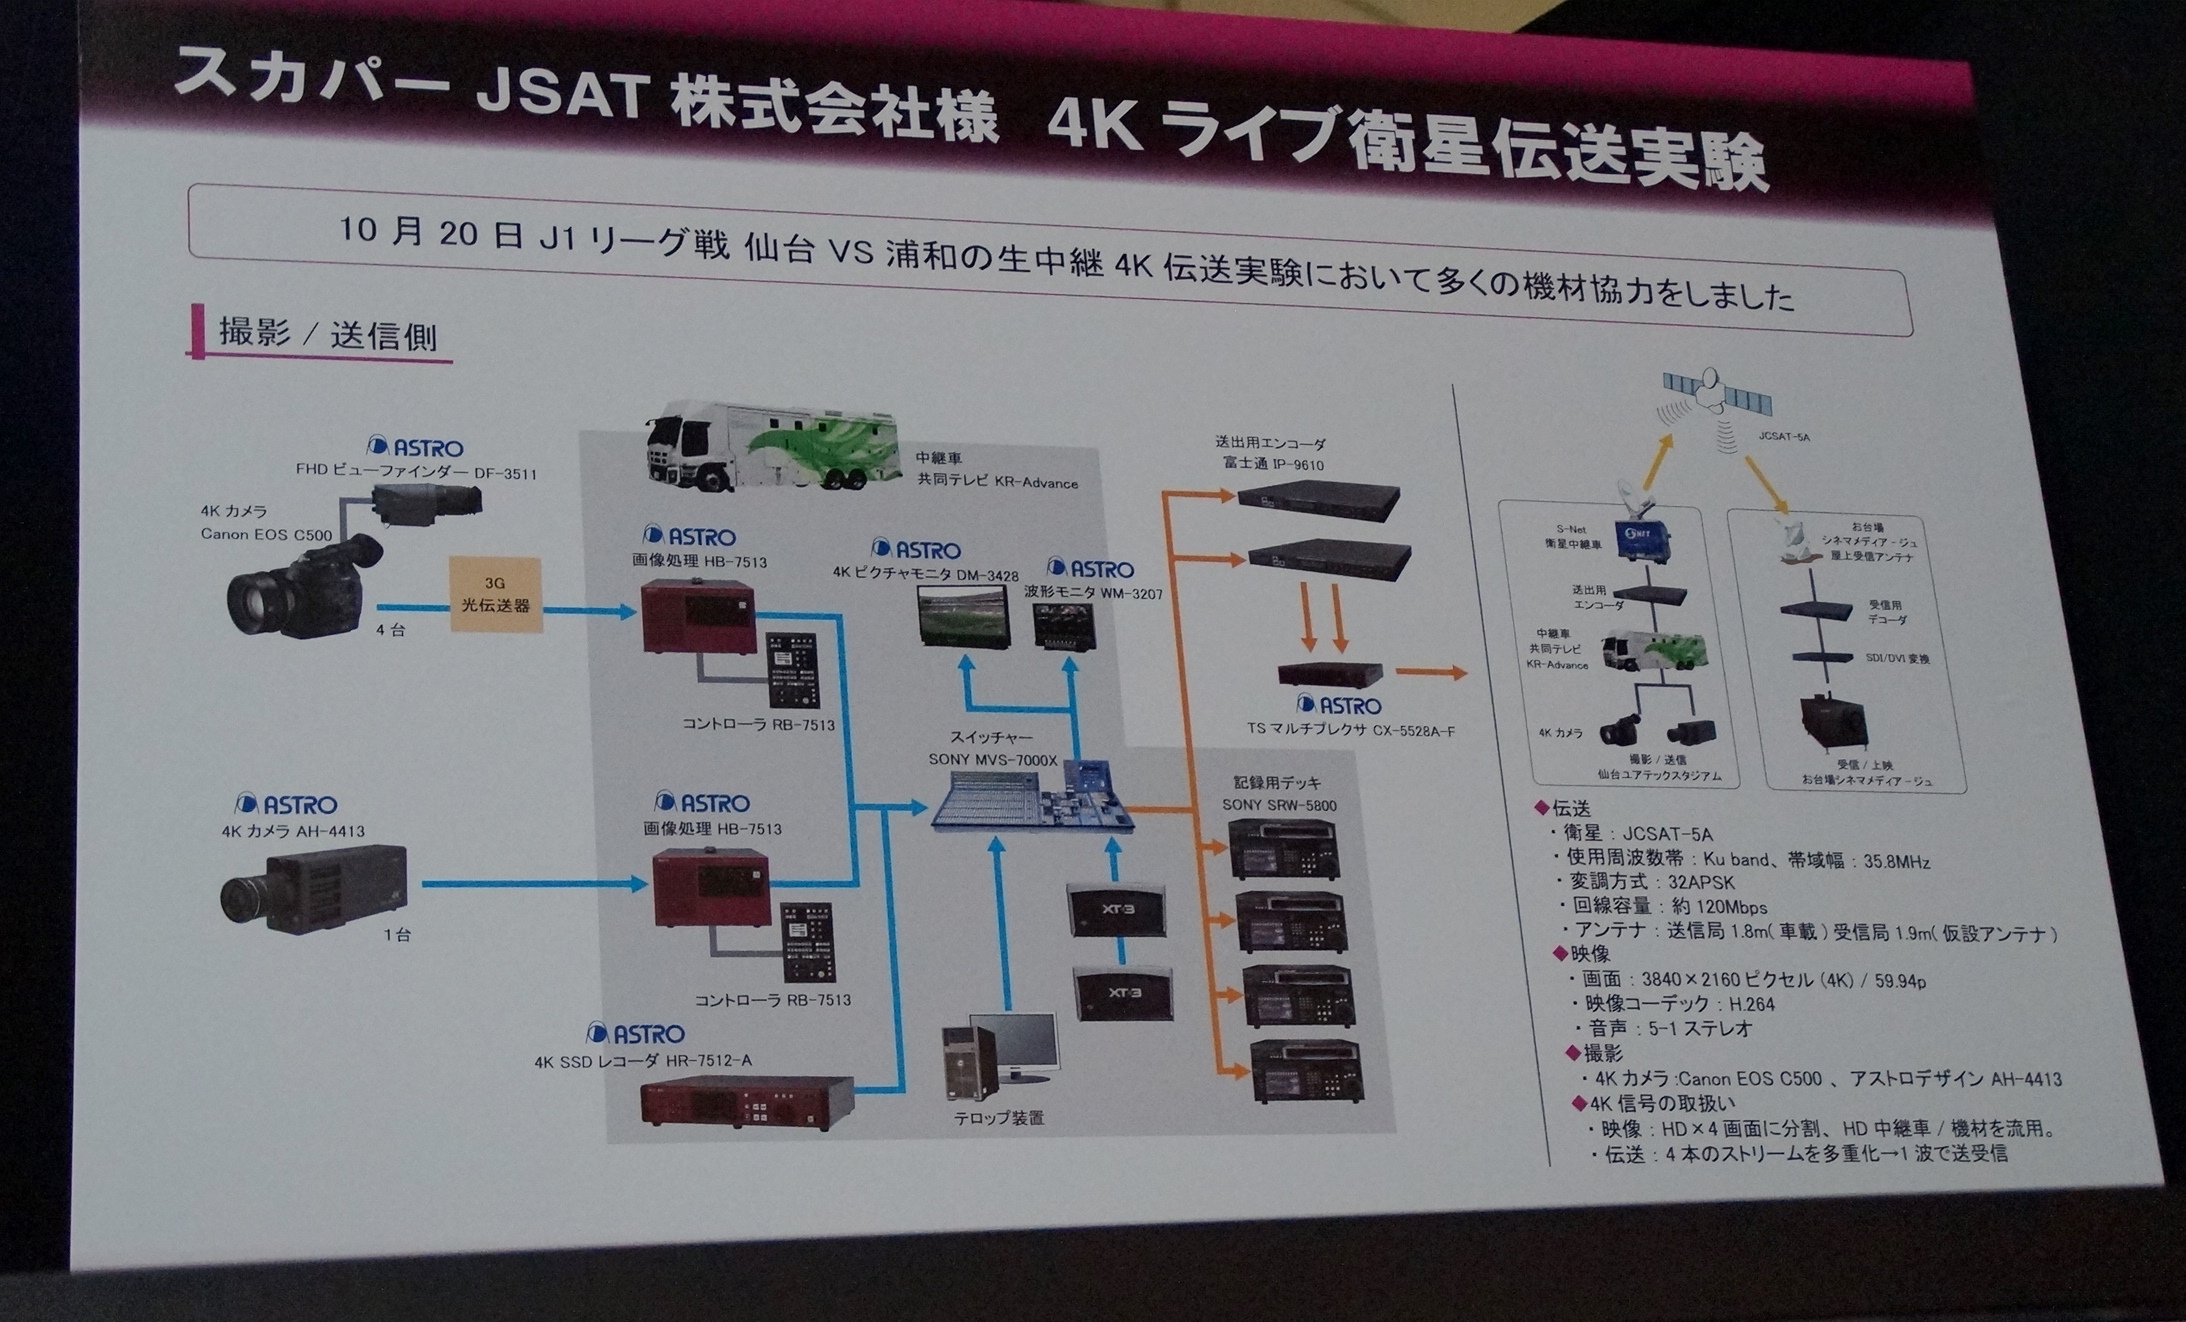 4K live delivery experiment systems (Fujitsu and ASTRODESIGN）